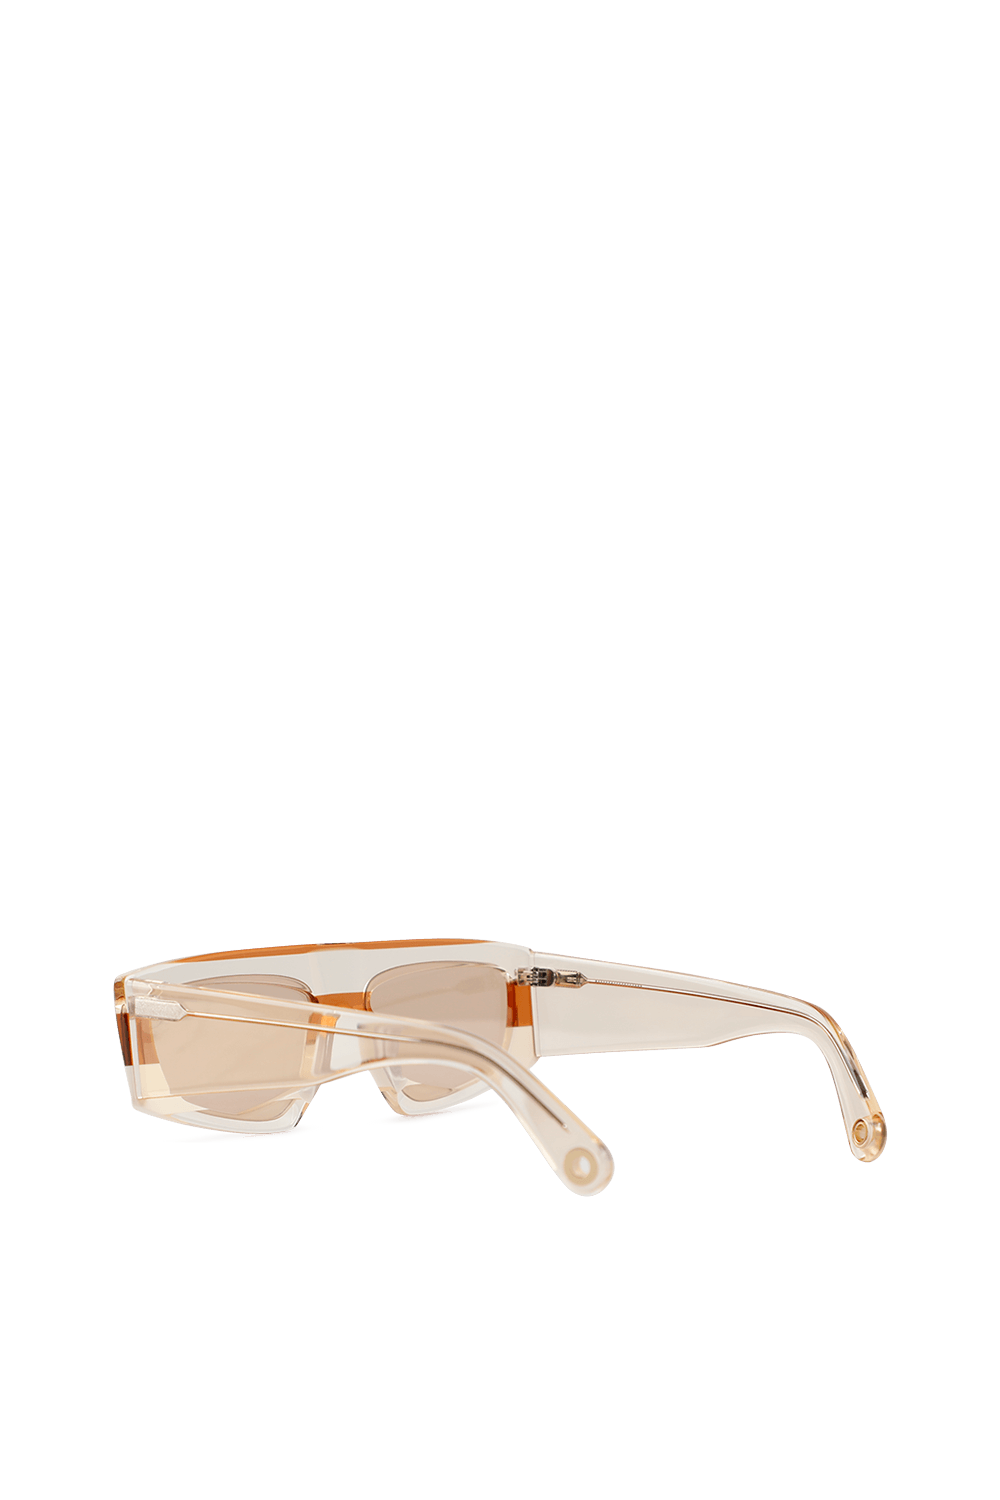 Les Lunettes Yauco in Orange and Nude JACQUEMUS